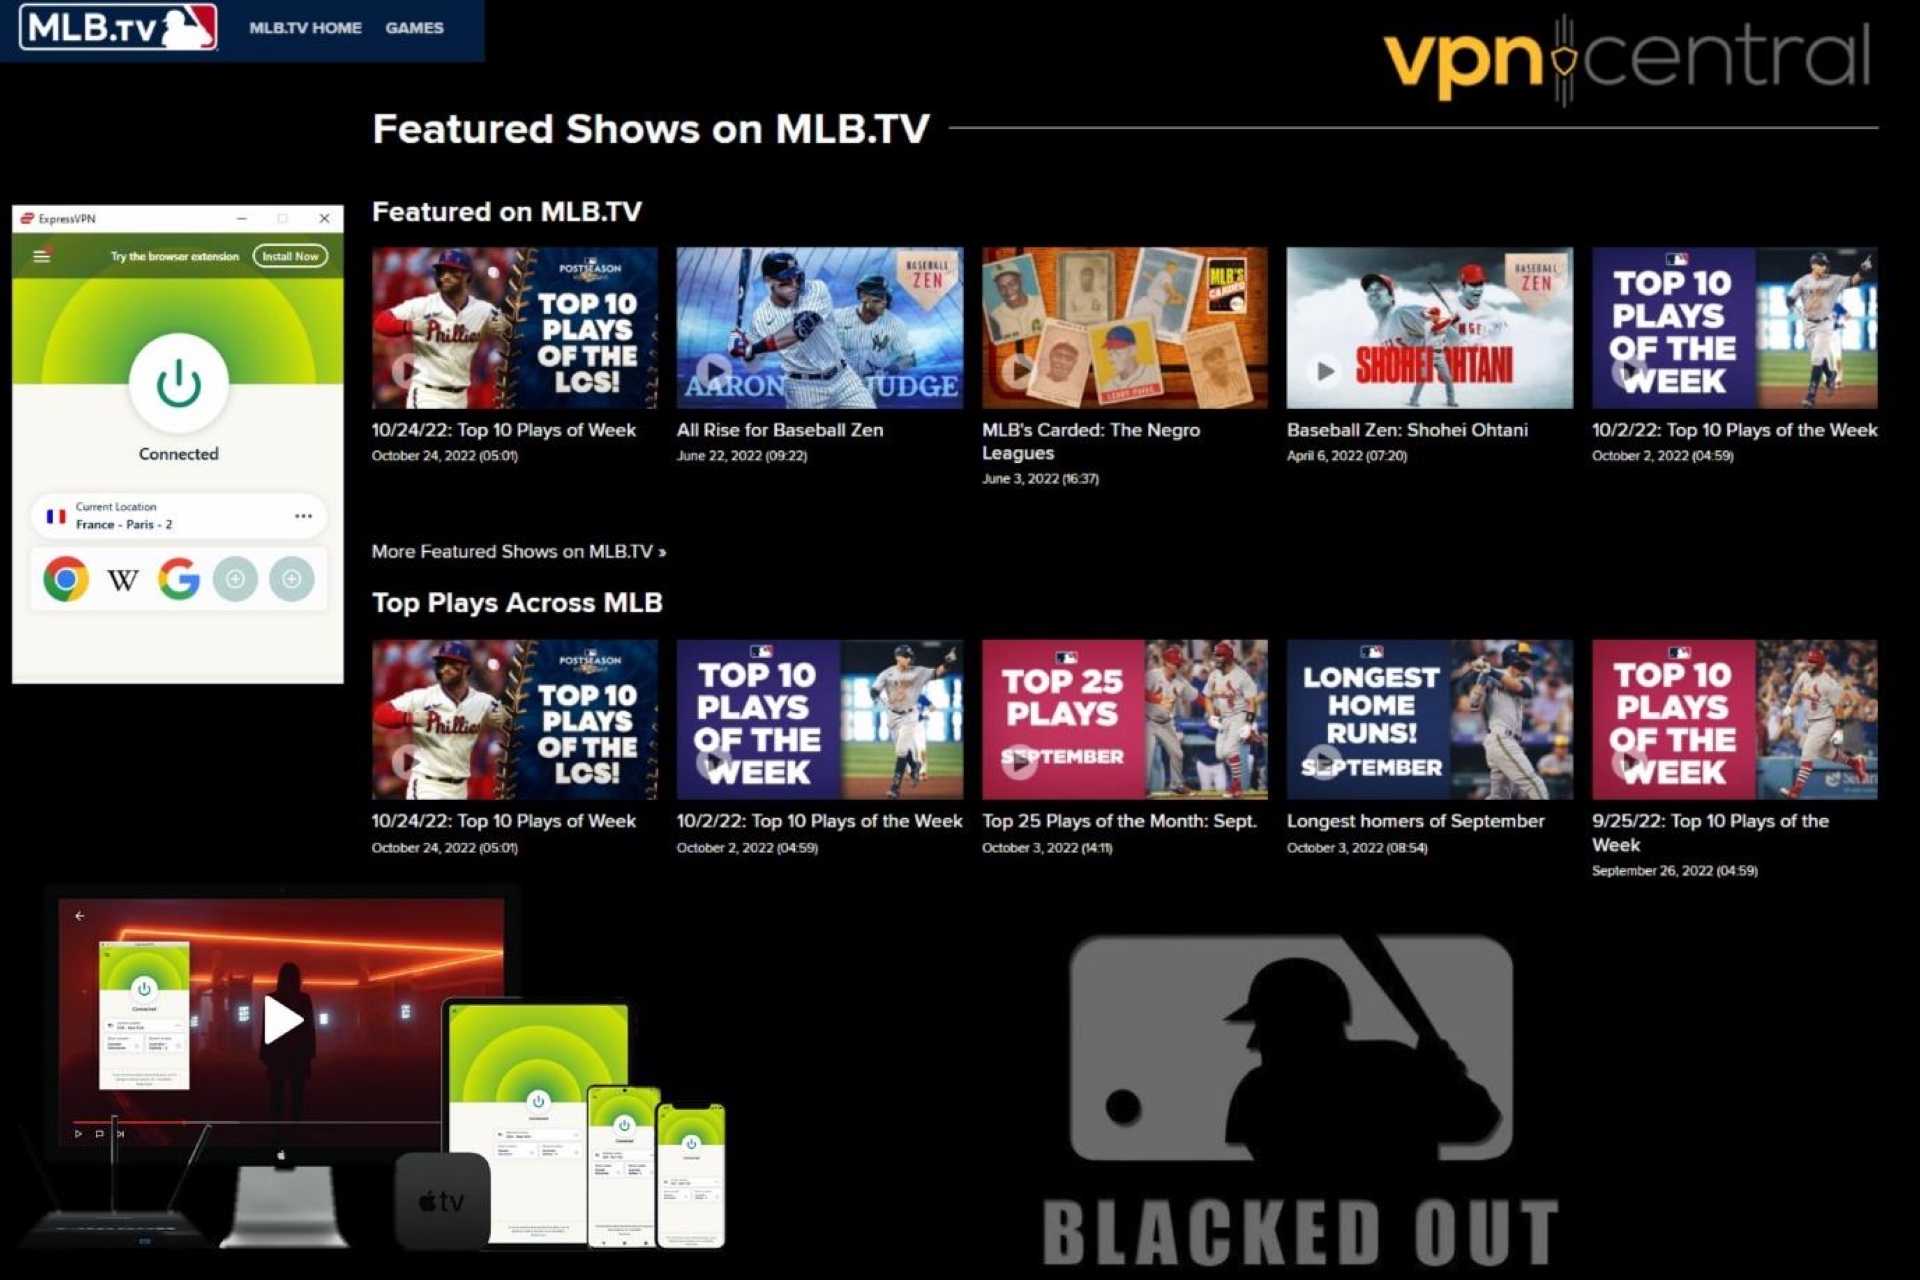 mlb game blocked in your area